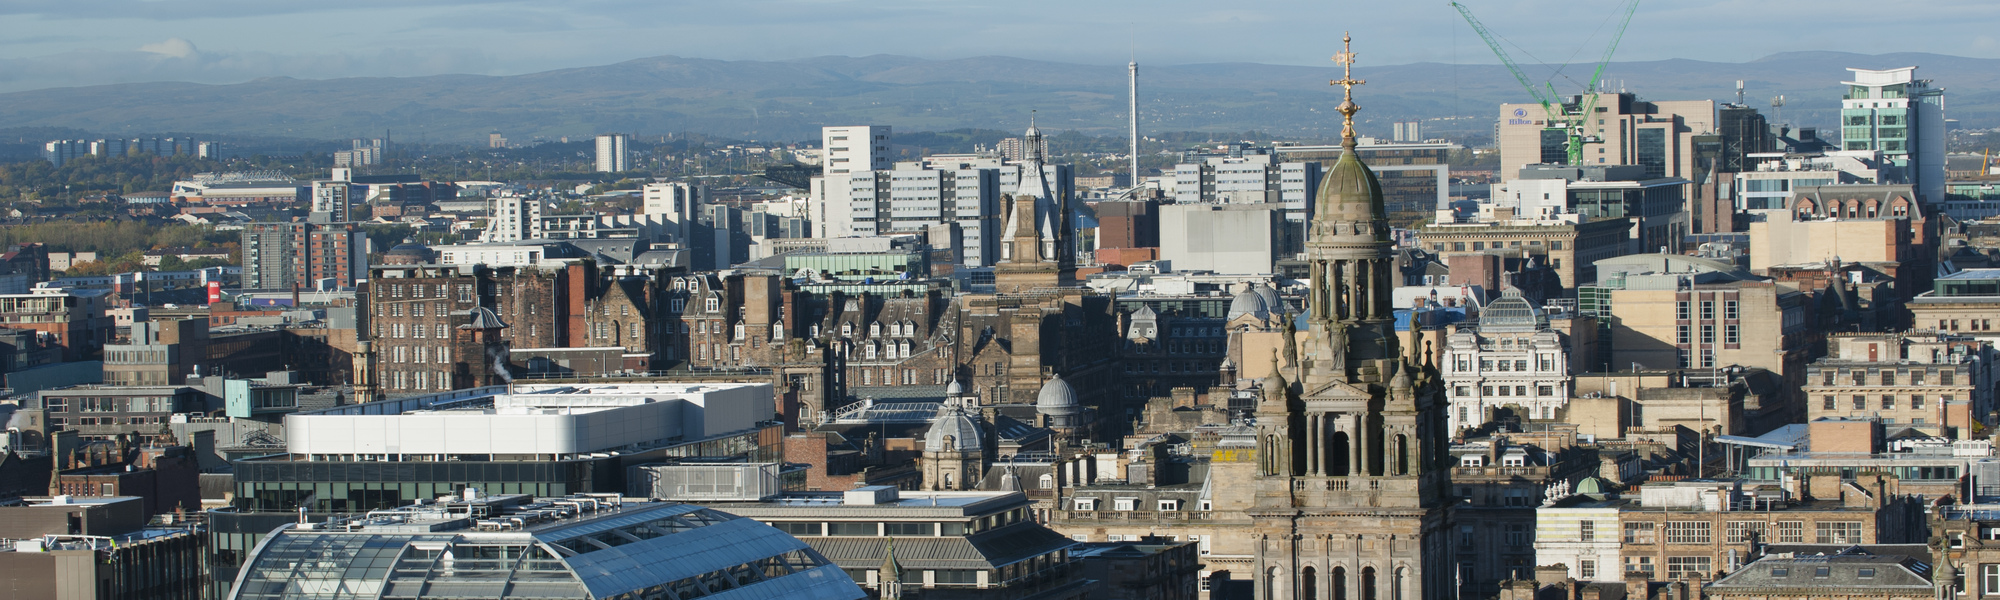 Glasgow City Centre, Southwest from Livingstone Tower roof